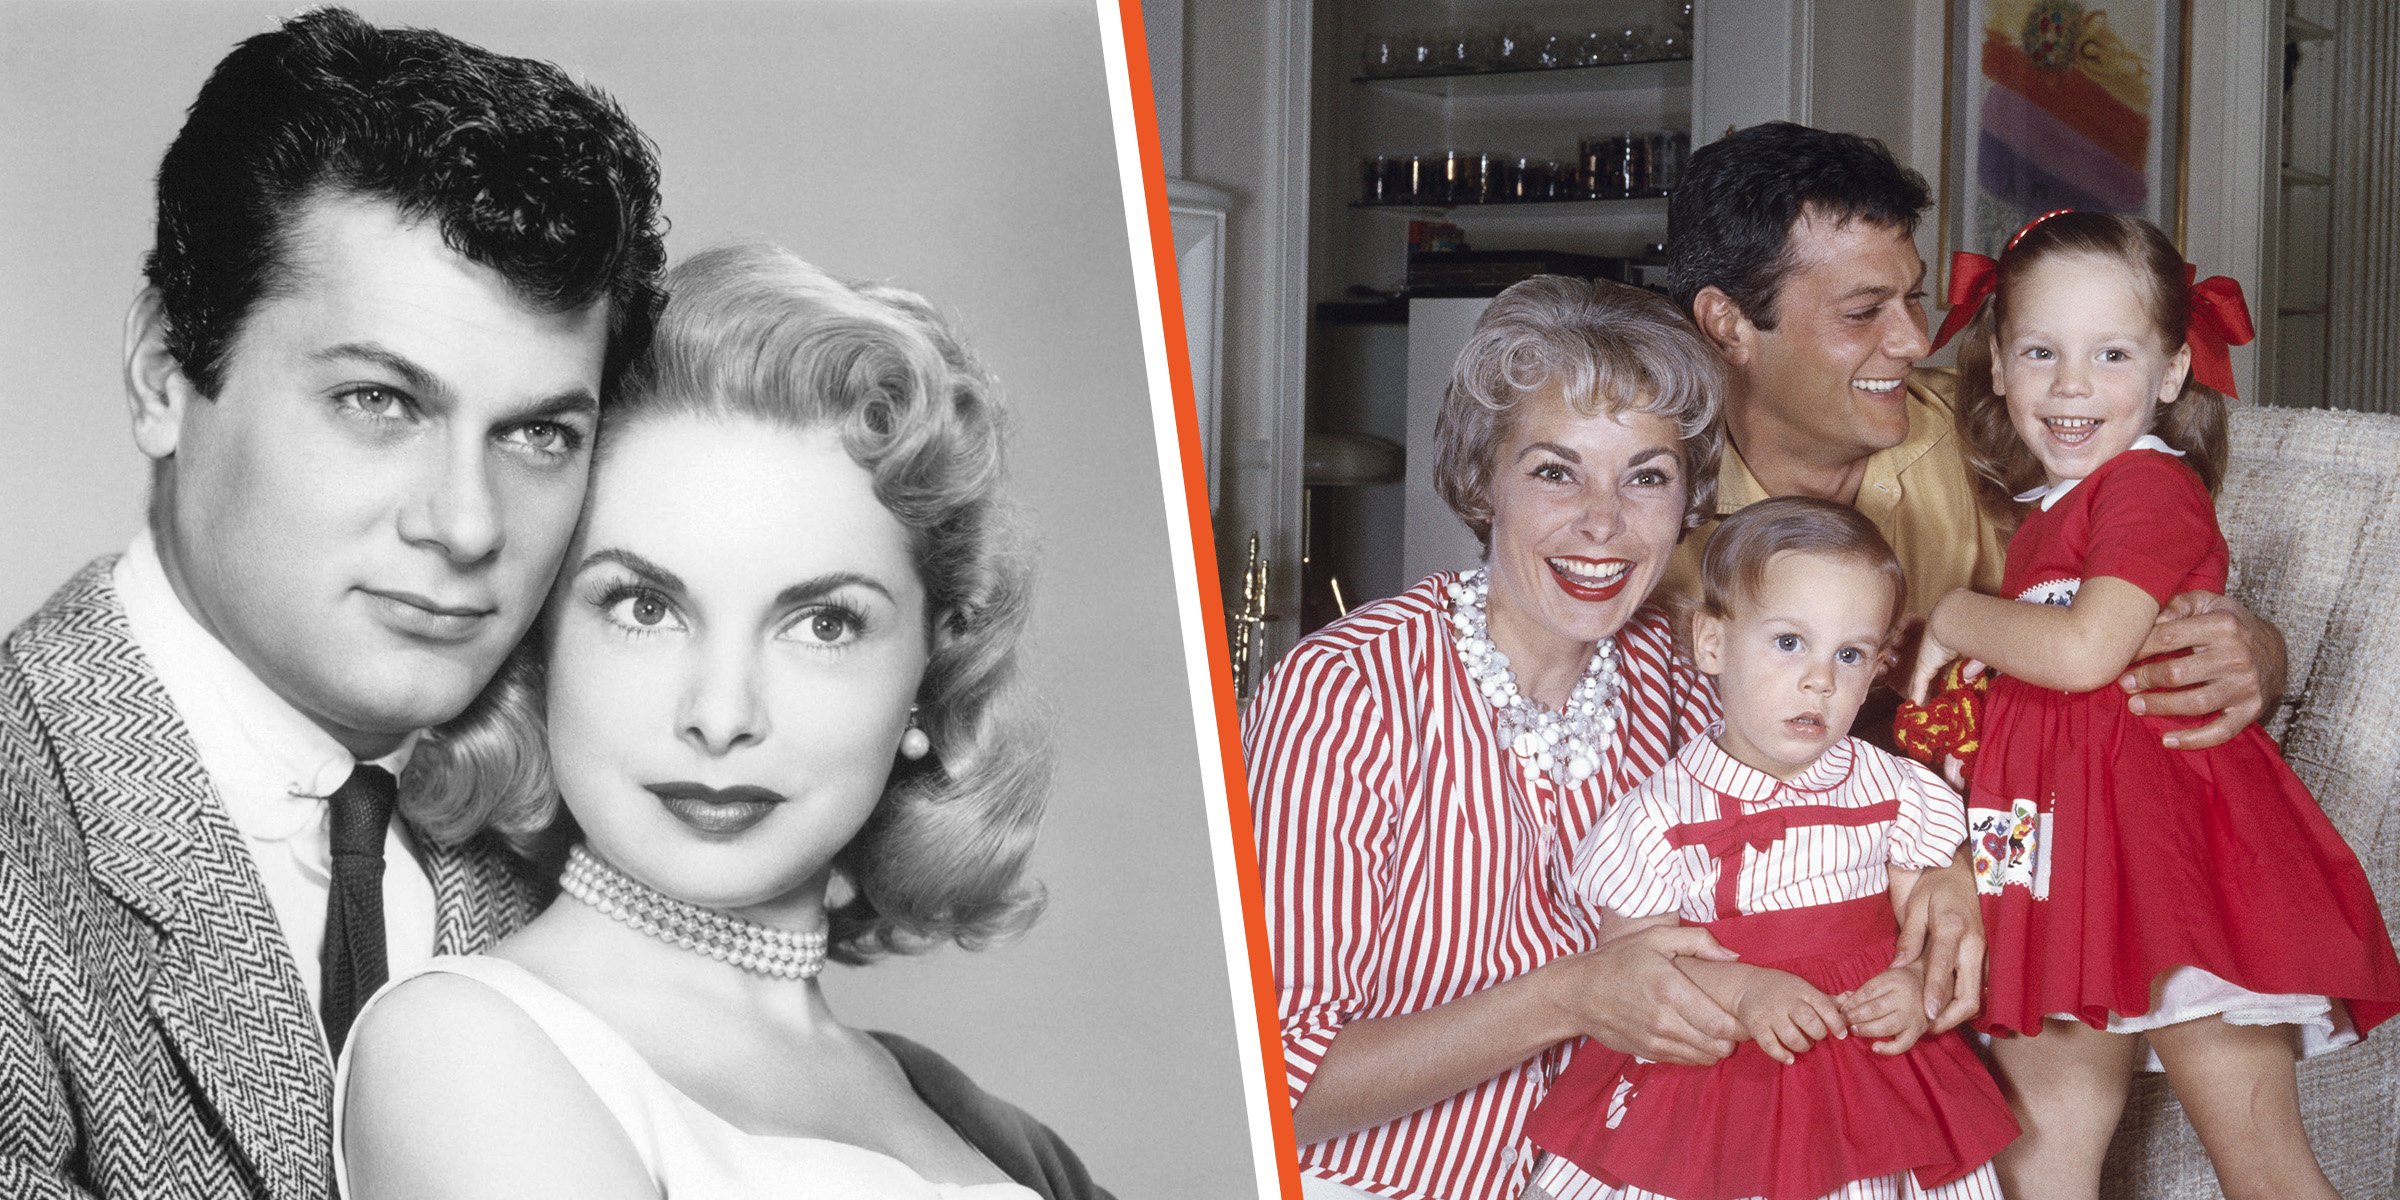 Tony Curtis and Janet Leigh | Tony Curtis and Janet Leigh with their kids | Source: Getty Images